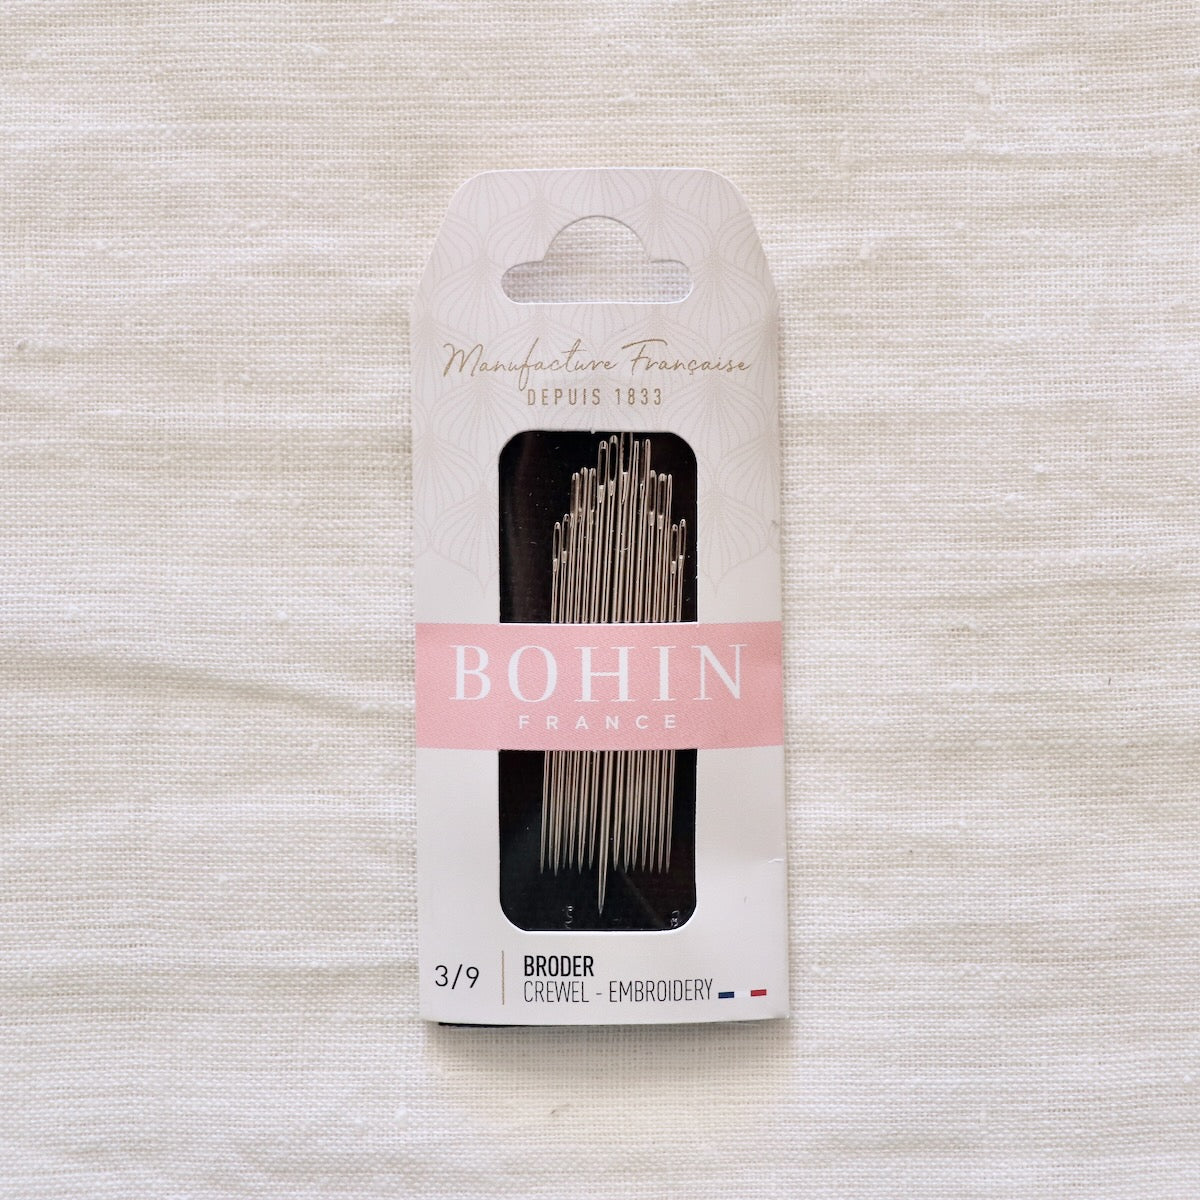 bohin crewel needles for hand embroidery made in France